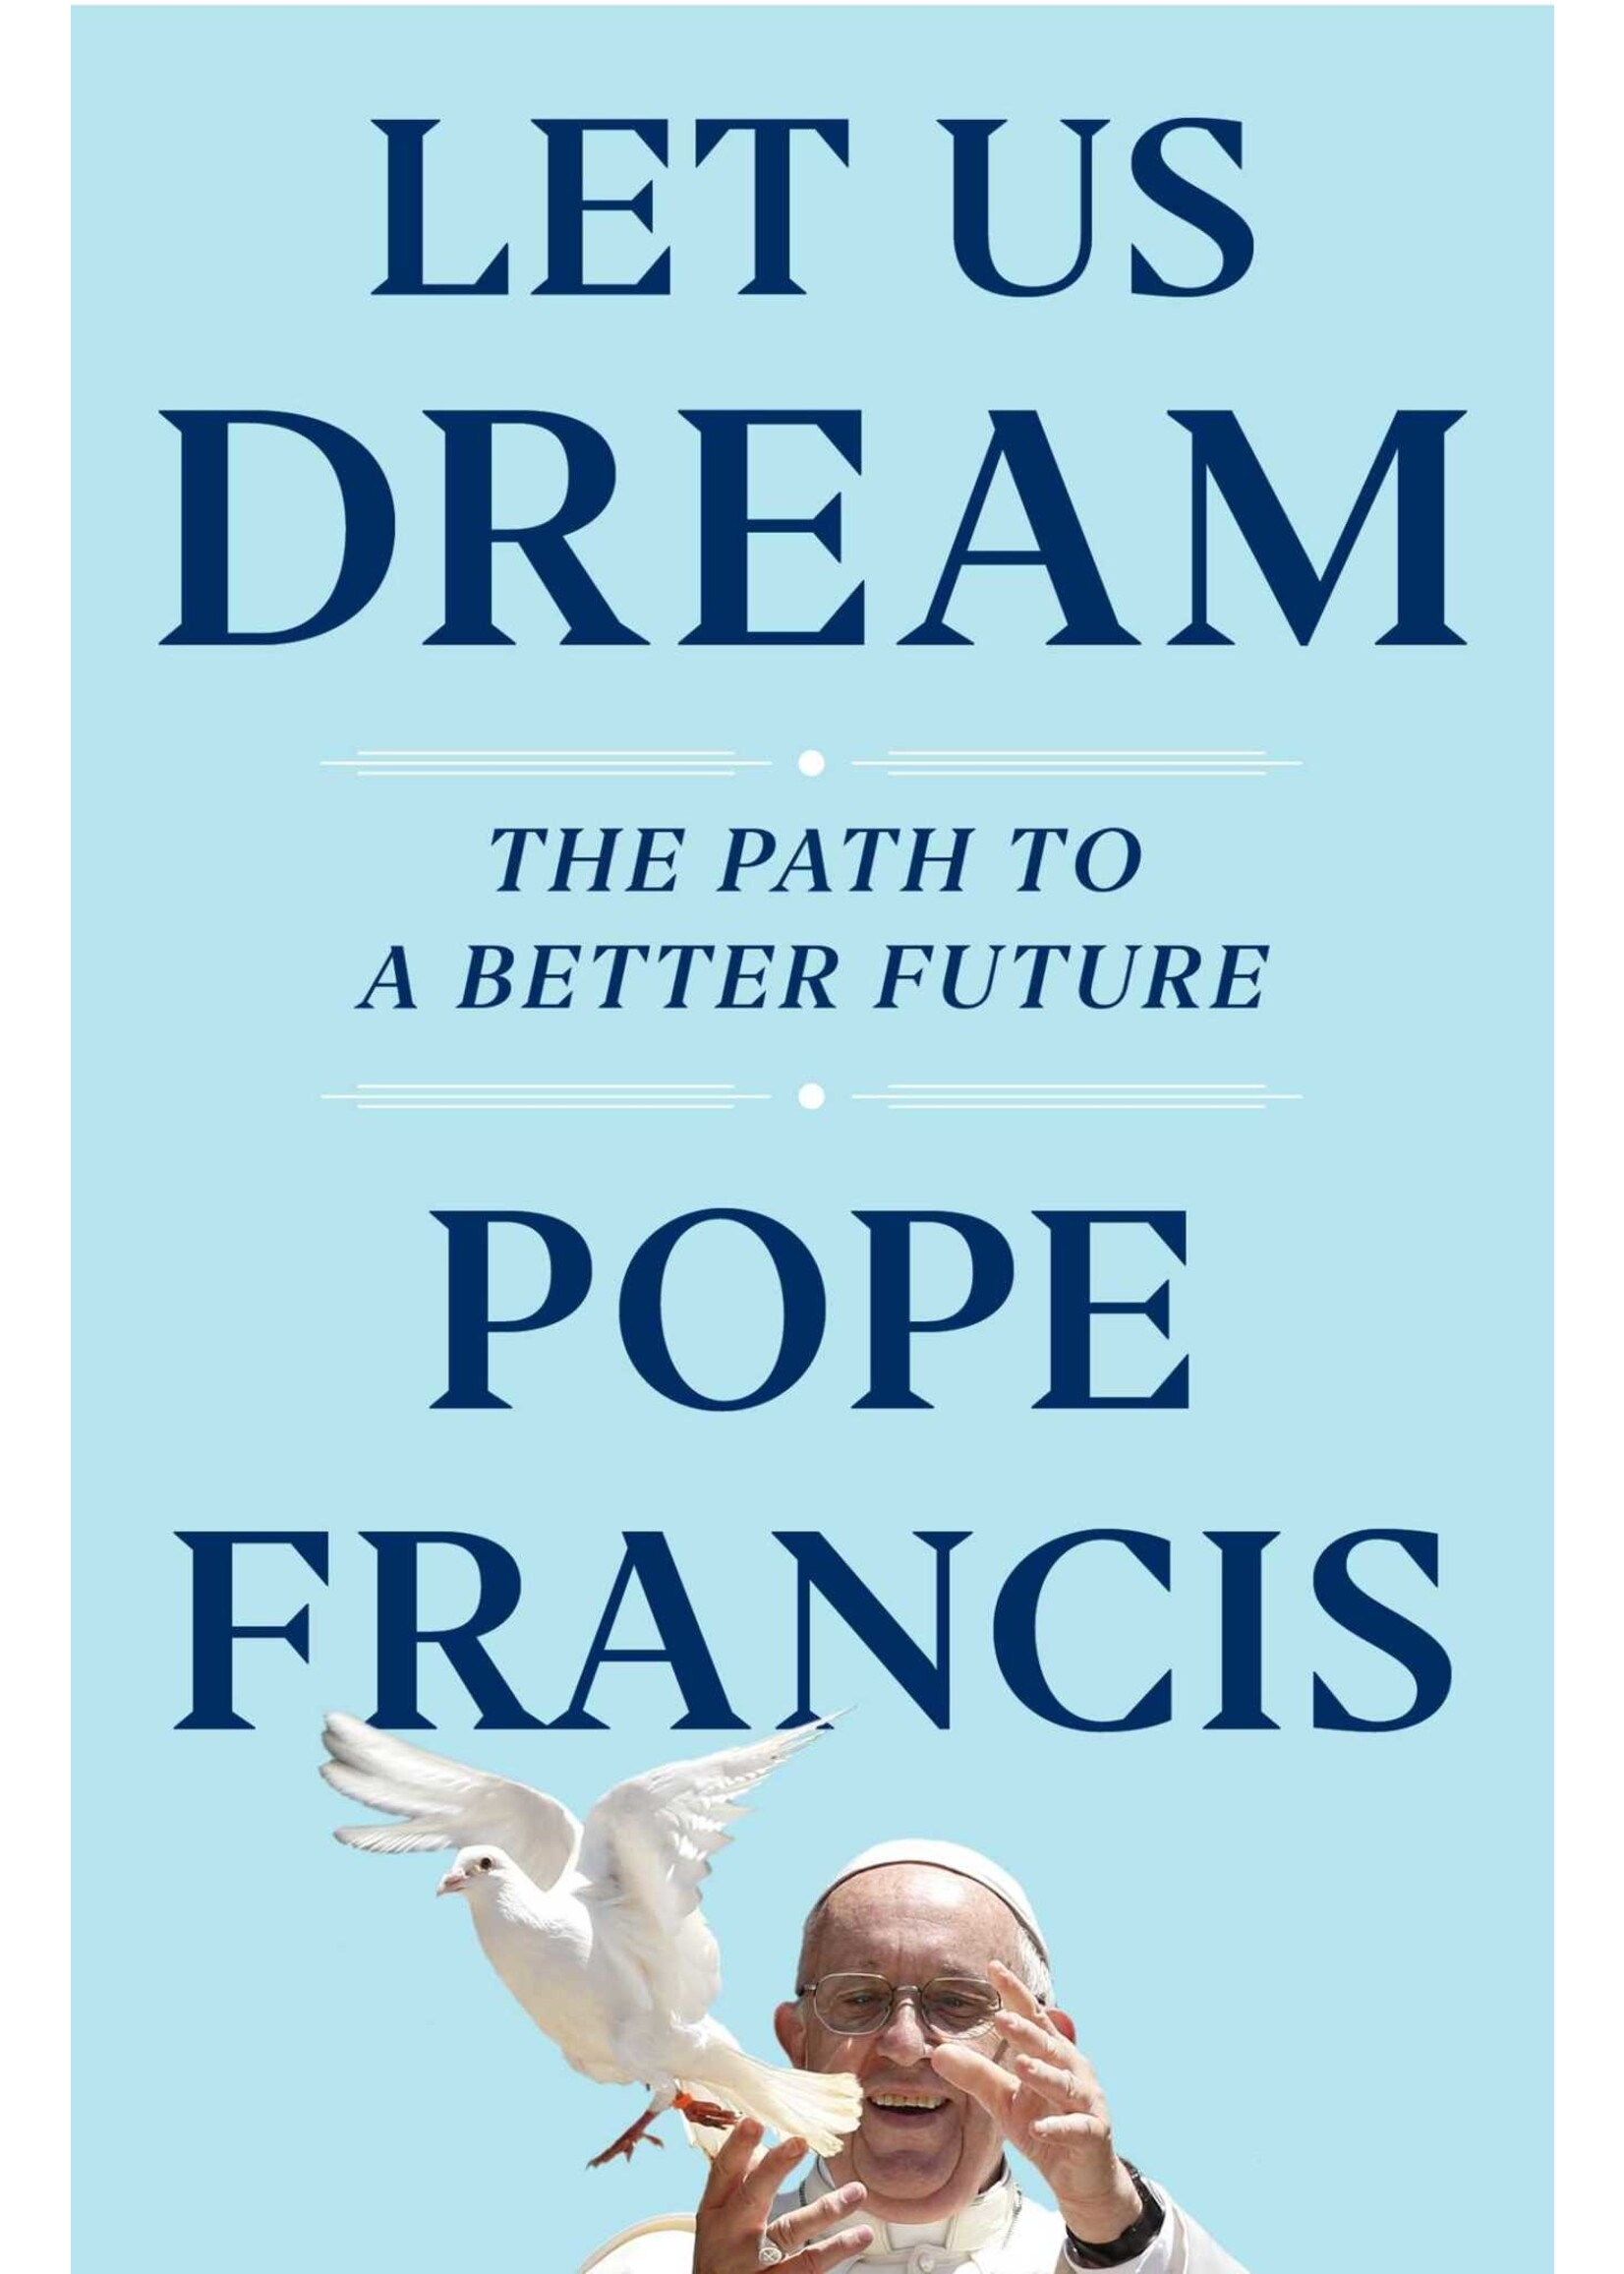 Let Us Dream: The Path to a Better Future by Pope Francis